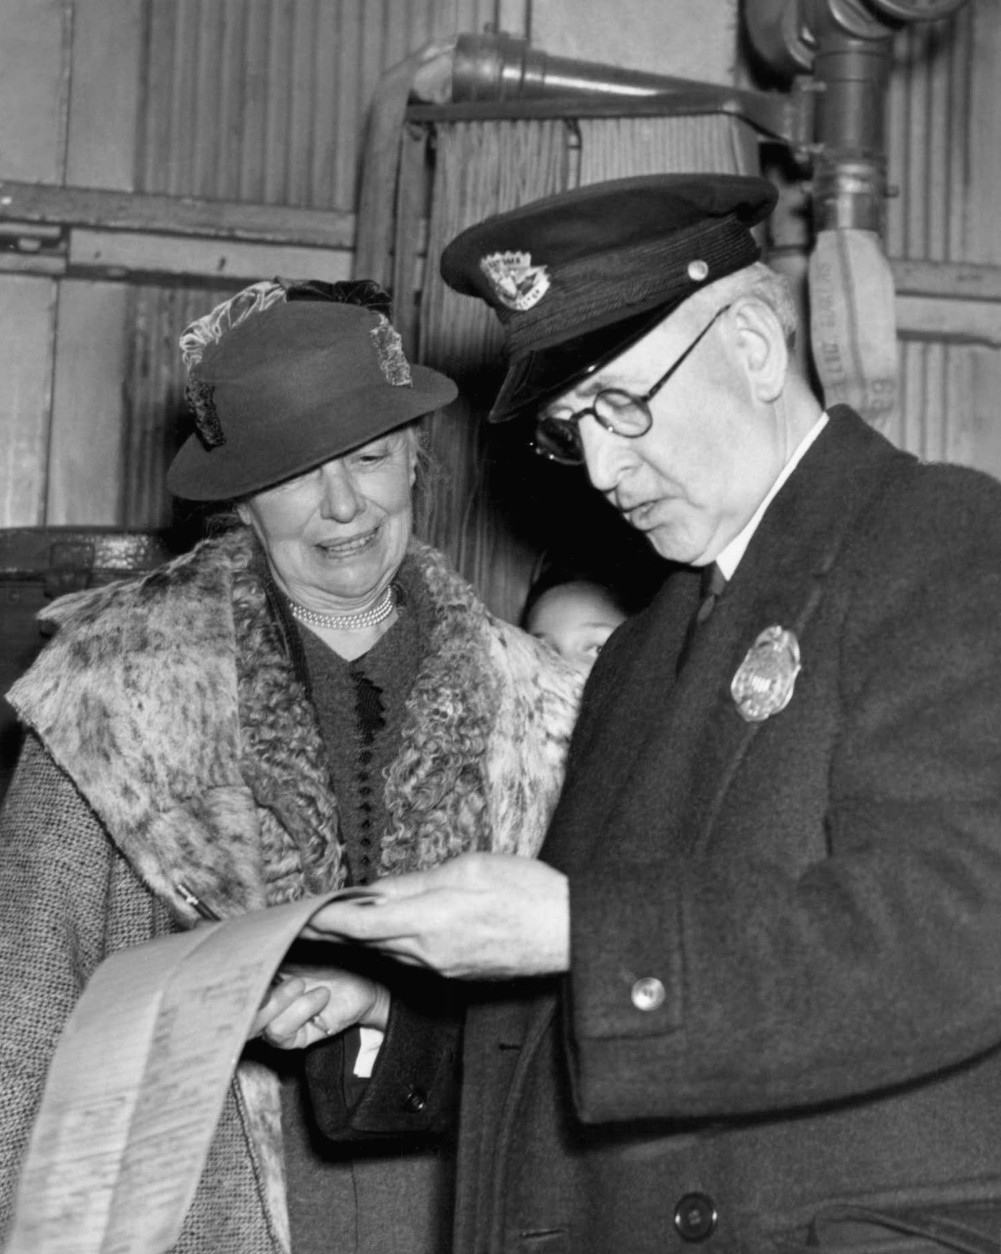 Mrs. Helen Taft, widow of the former President William Howard Taft, is checking with a customs officer as she arrived on April 5, 1936 in New York aboard the steamer vacation from Vera Cruz, Mexico, were she went for a winter holiday.   Mrs. Taft is returning to Washington D.C. to attend the cherry blossom festival which she established while in the White House (AP Photo)